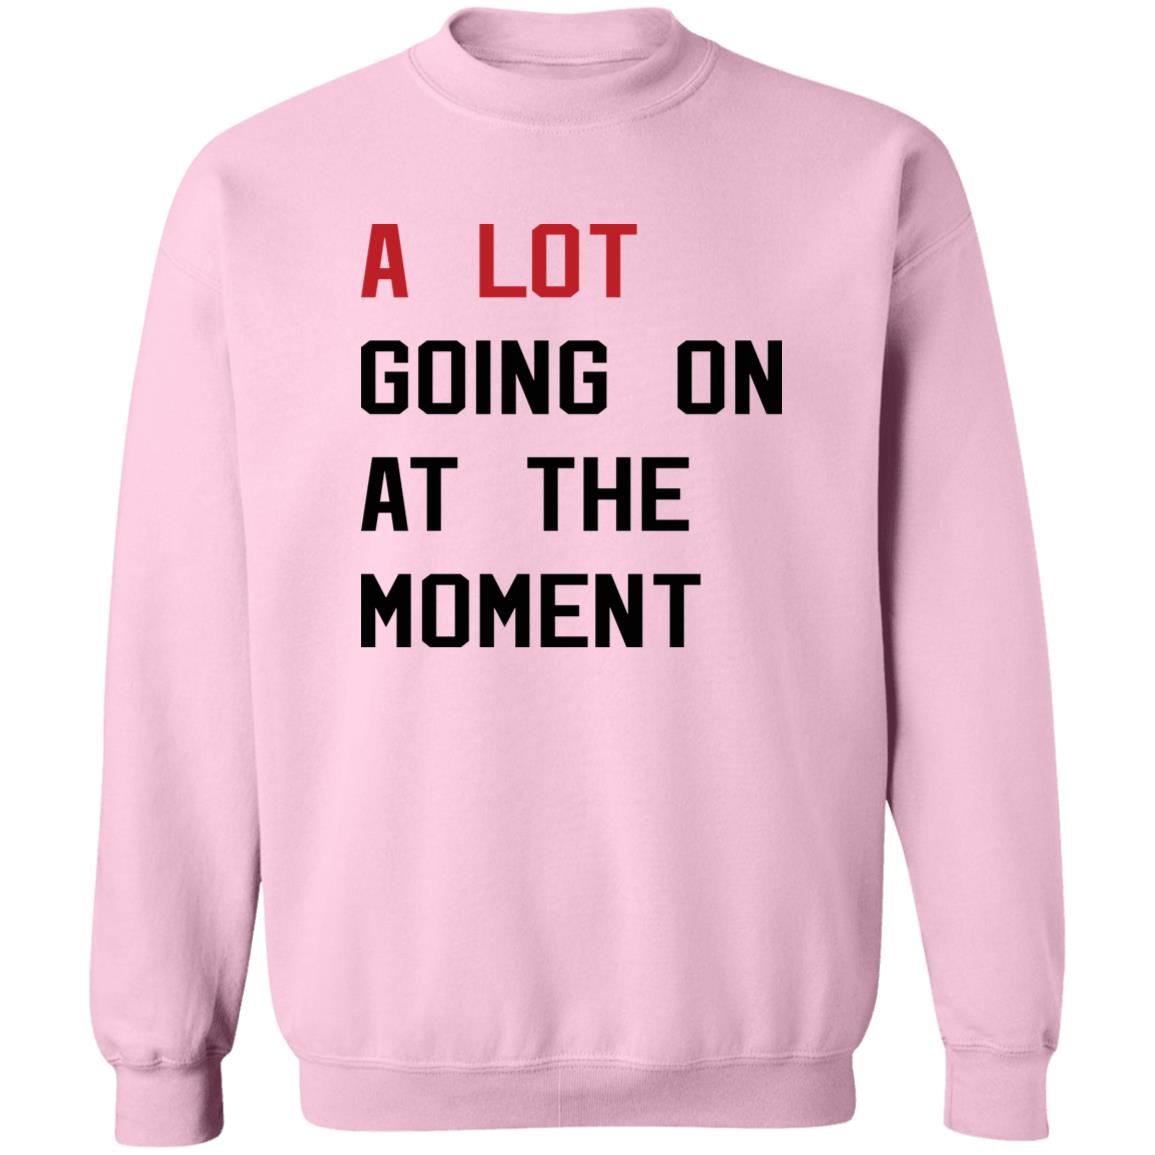 A Lot Going On At The Moment sweatshirt